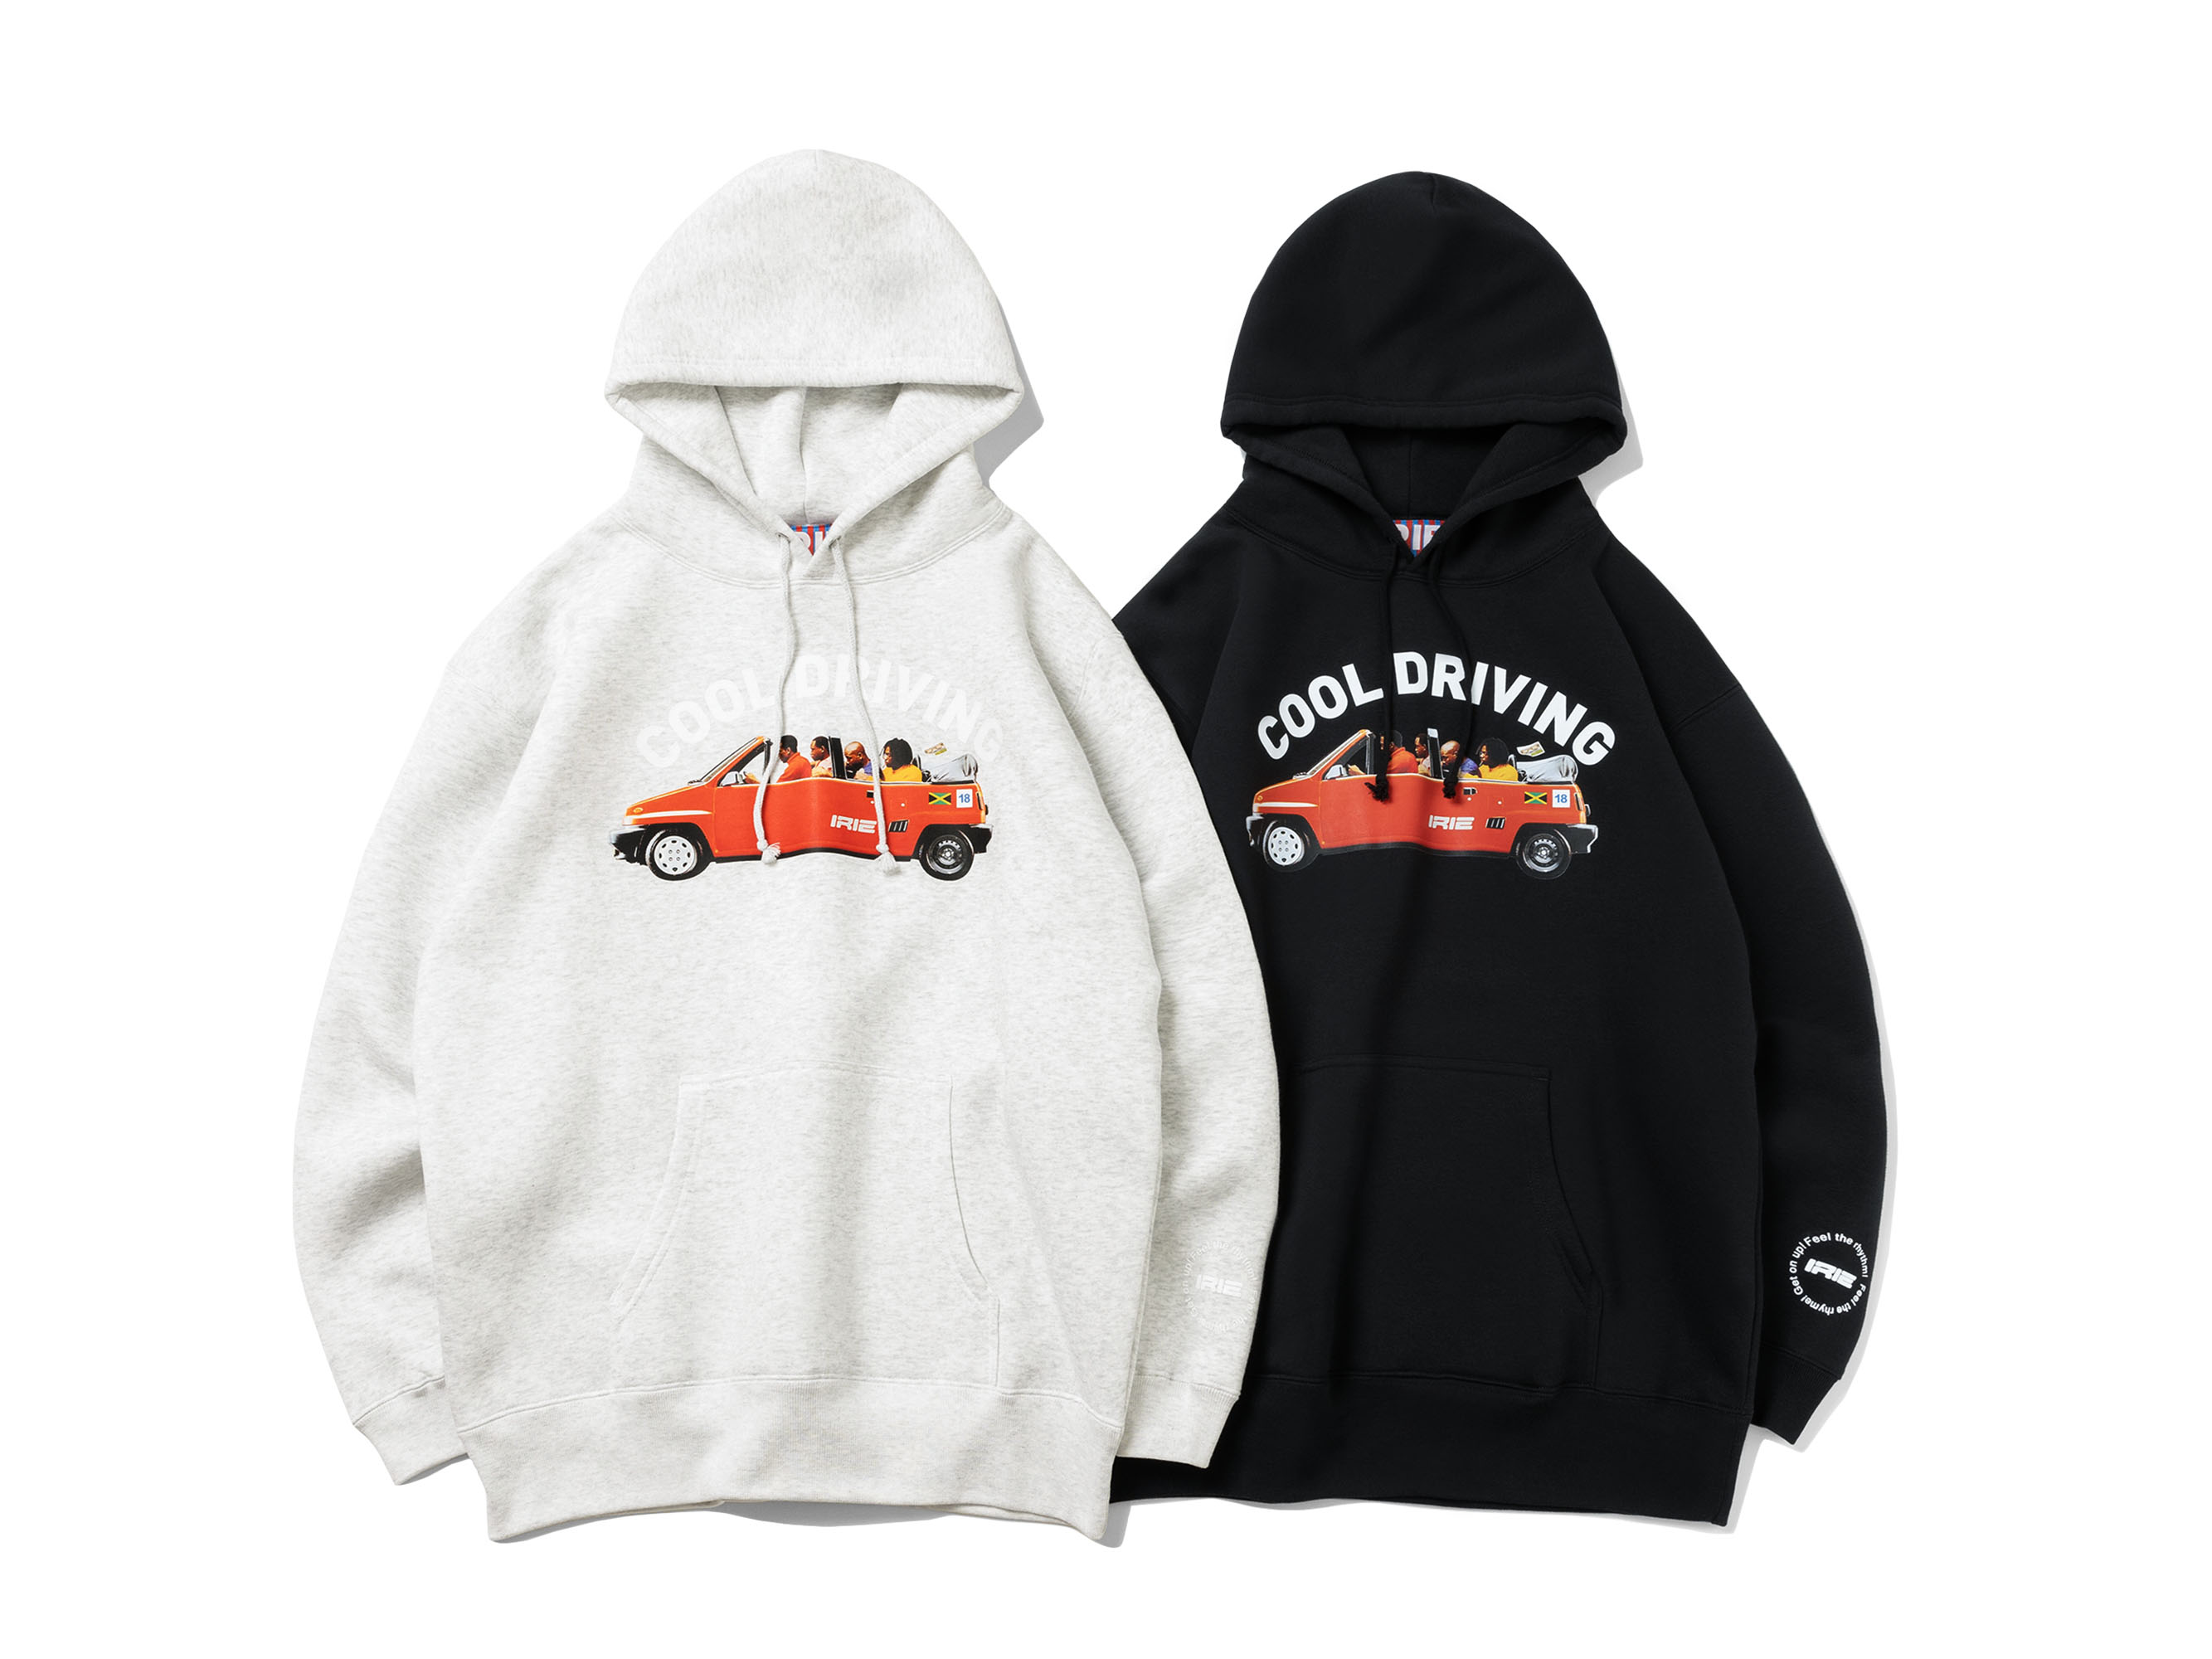 COOL DRIVING HOODIE - IRIE by irielife